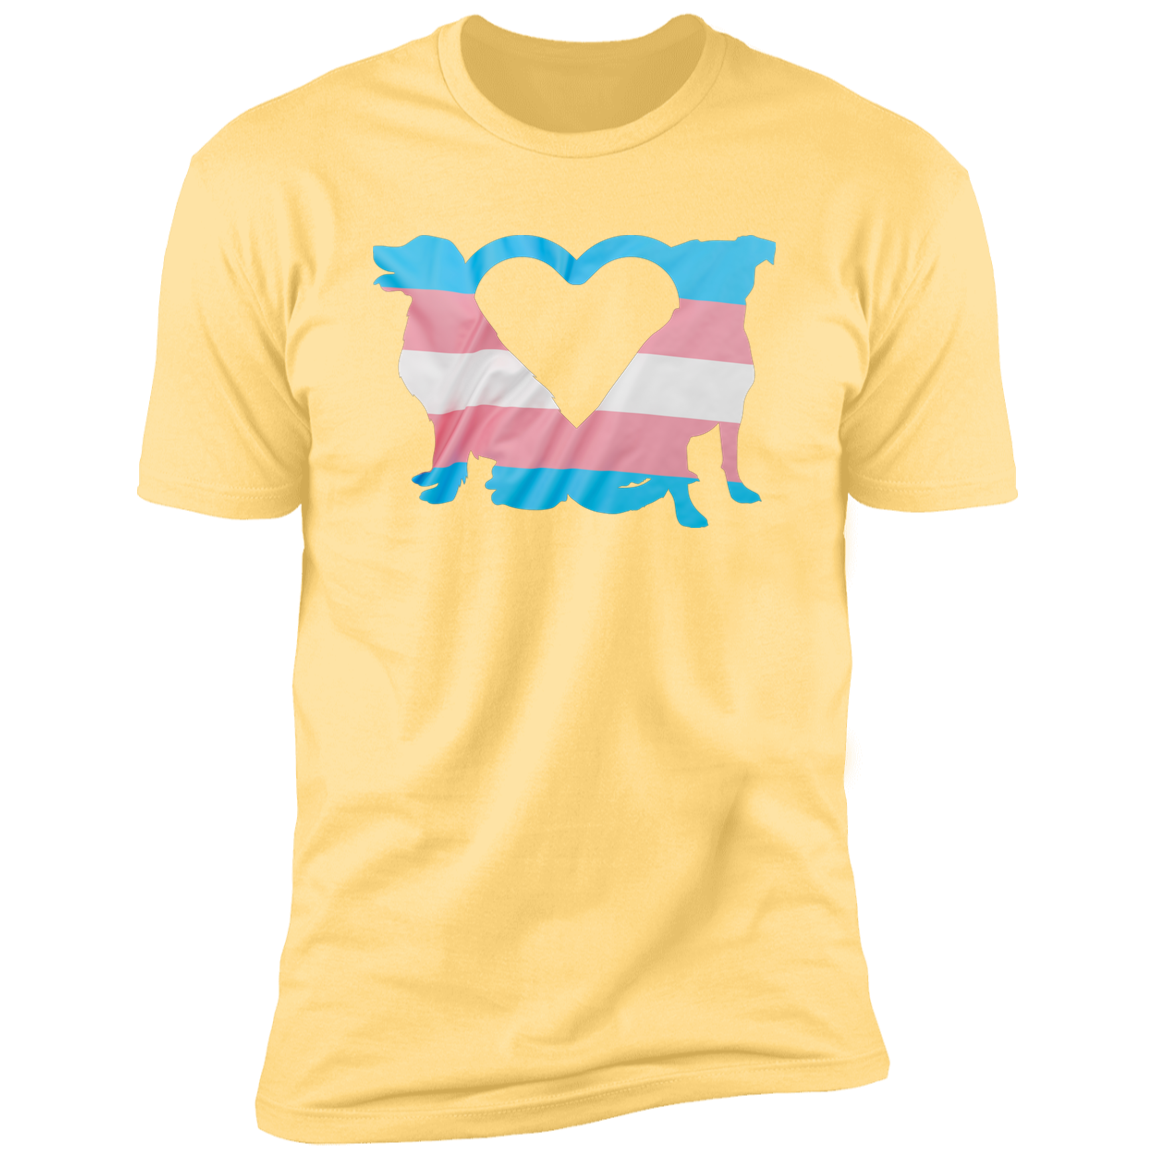 Trans Pride Dogs Heart Pride T-shirt, Trans Pride Dog Shirt for humans, in banana cream